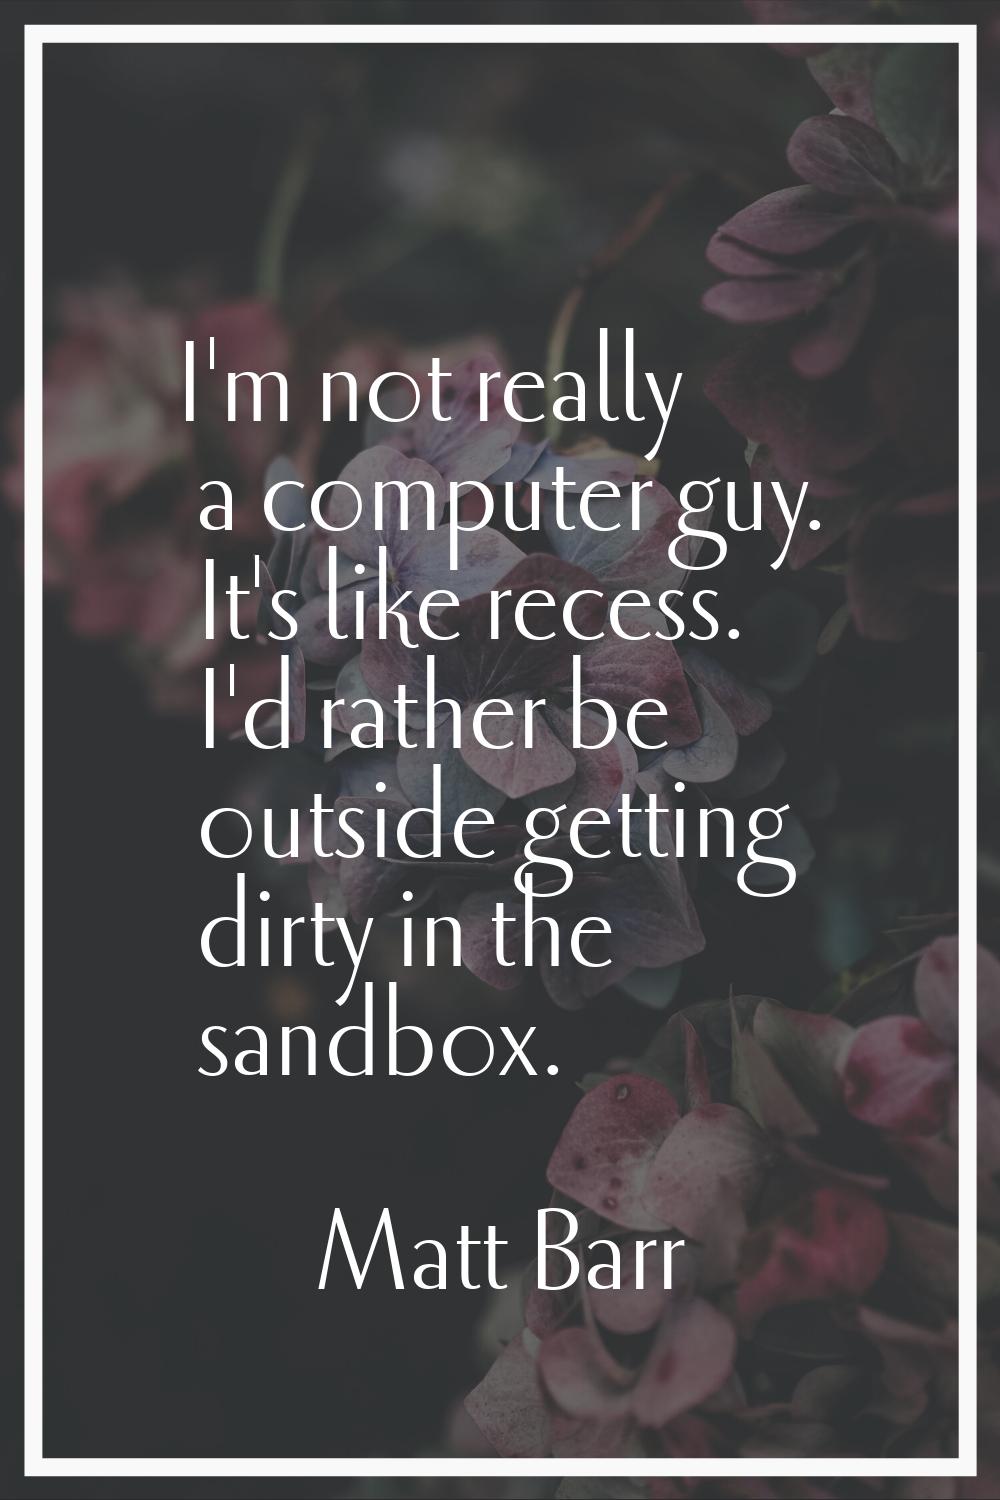 I'm not really a computer guy. It's like recess. I'd rather be outside getting dirty in the sandbox